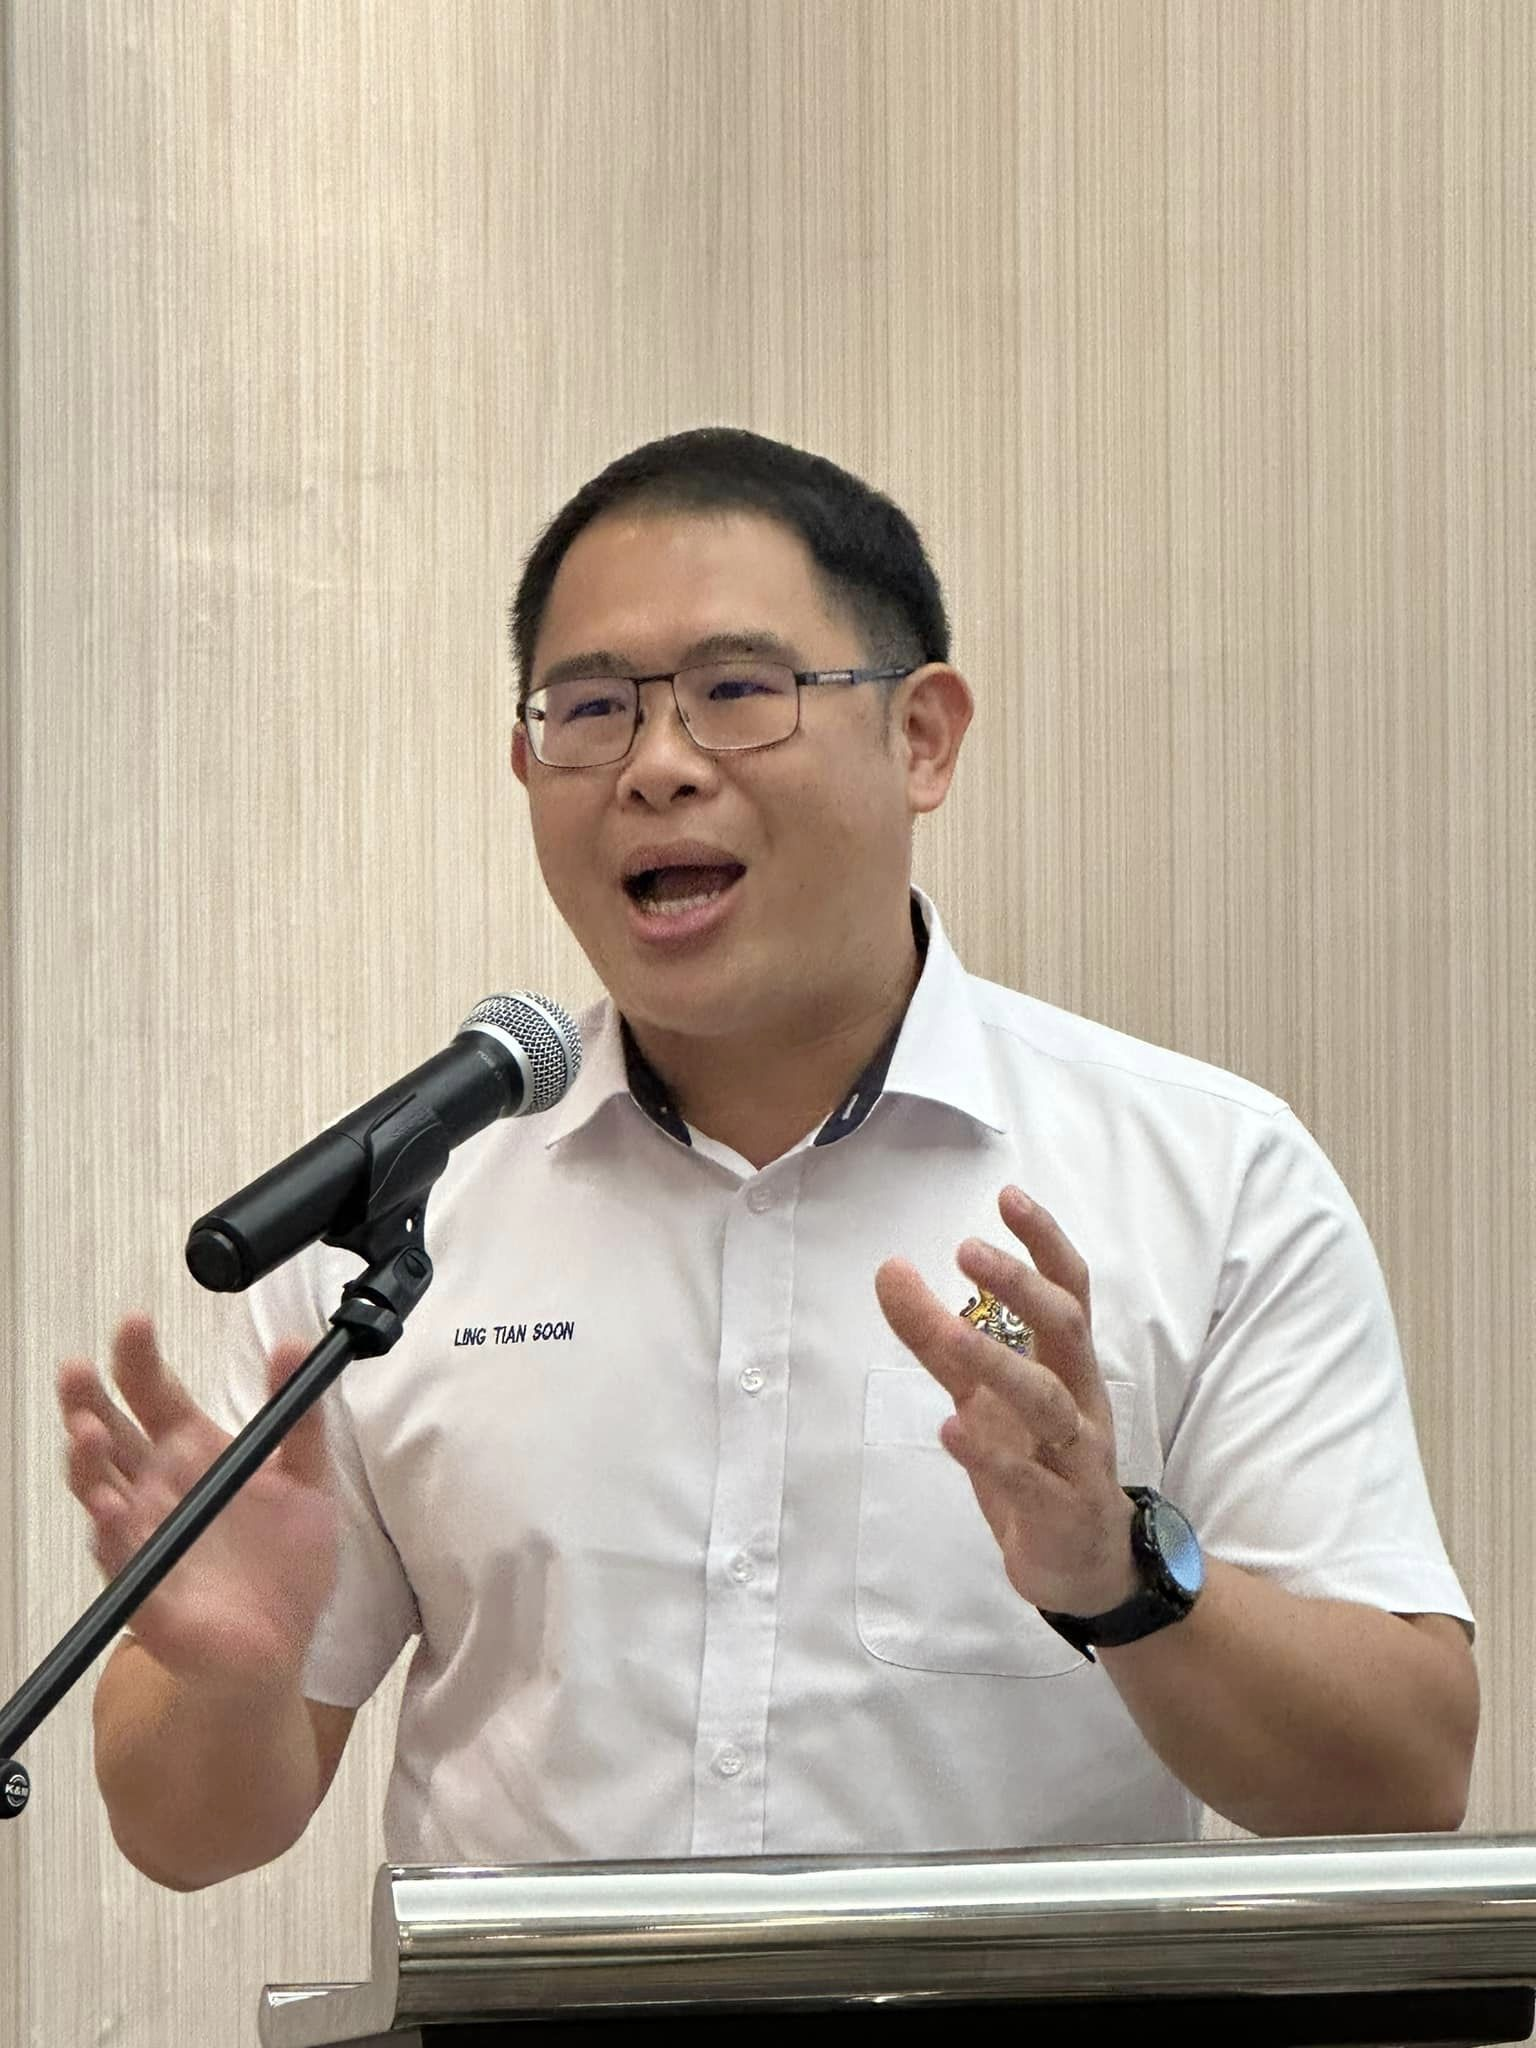 Johor health and unity committee chairman ling tian soon